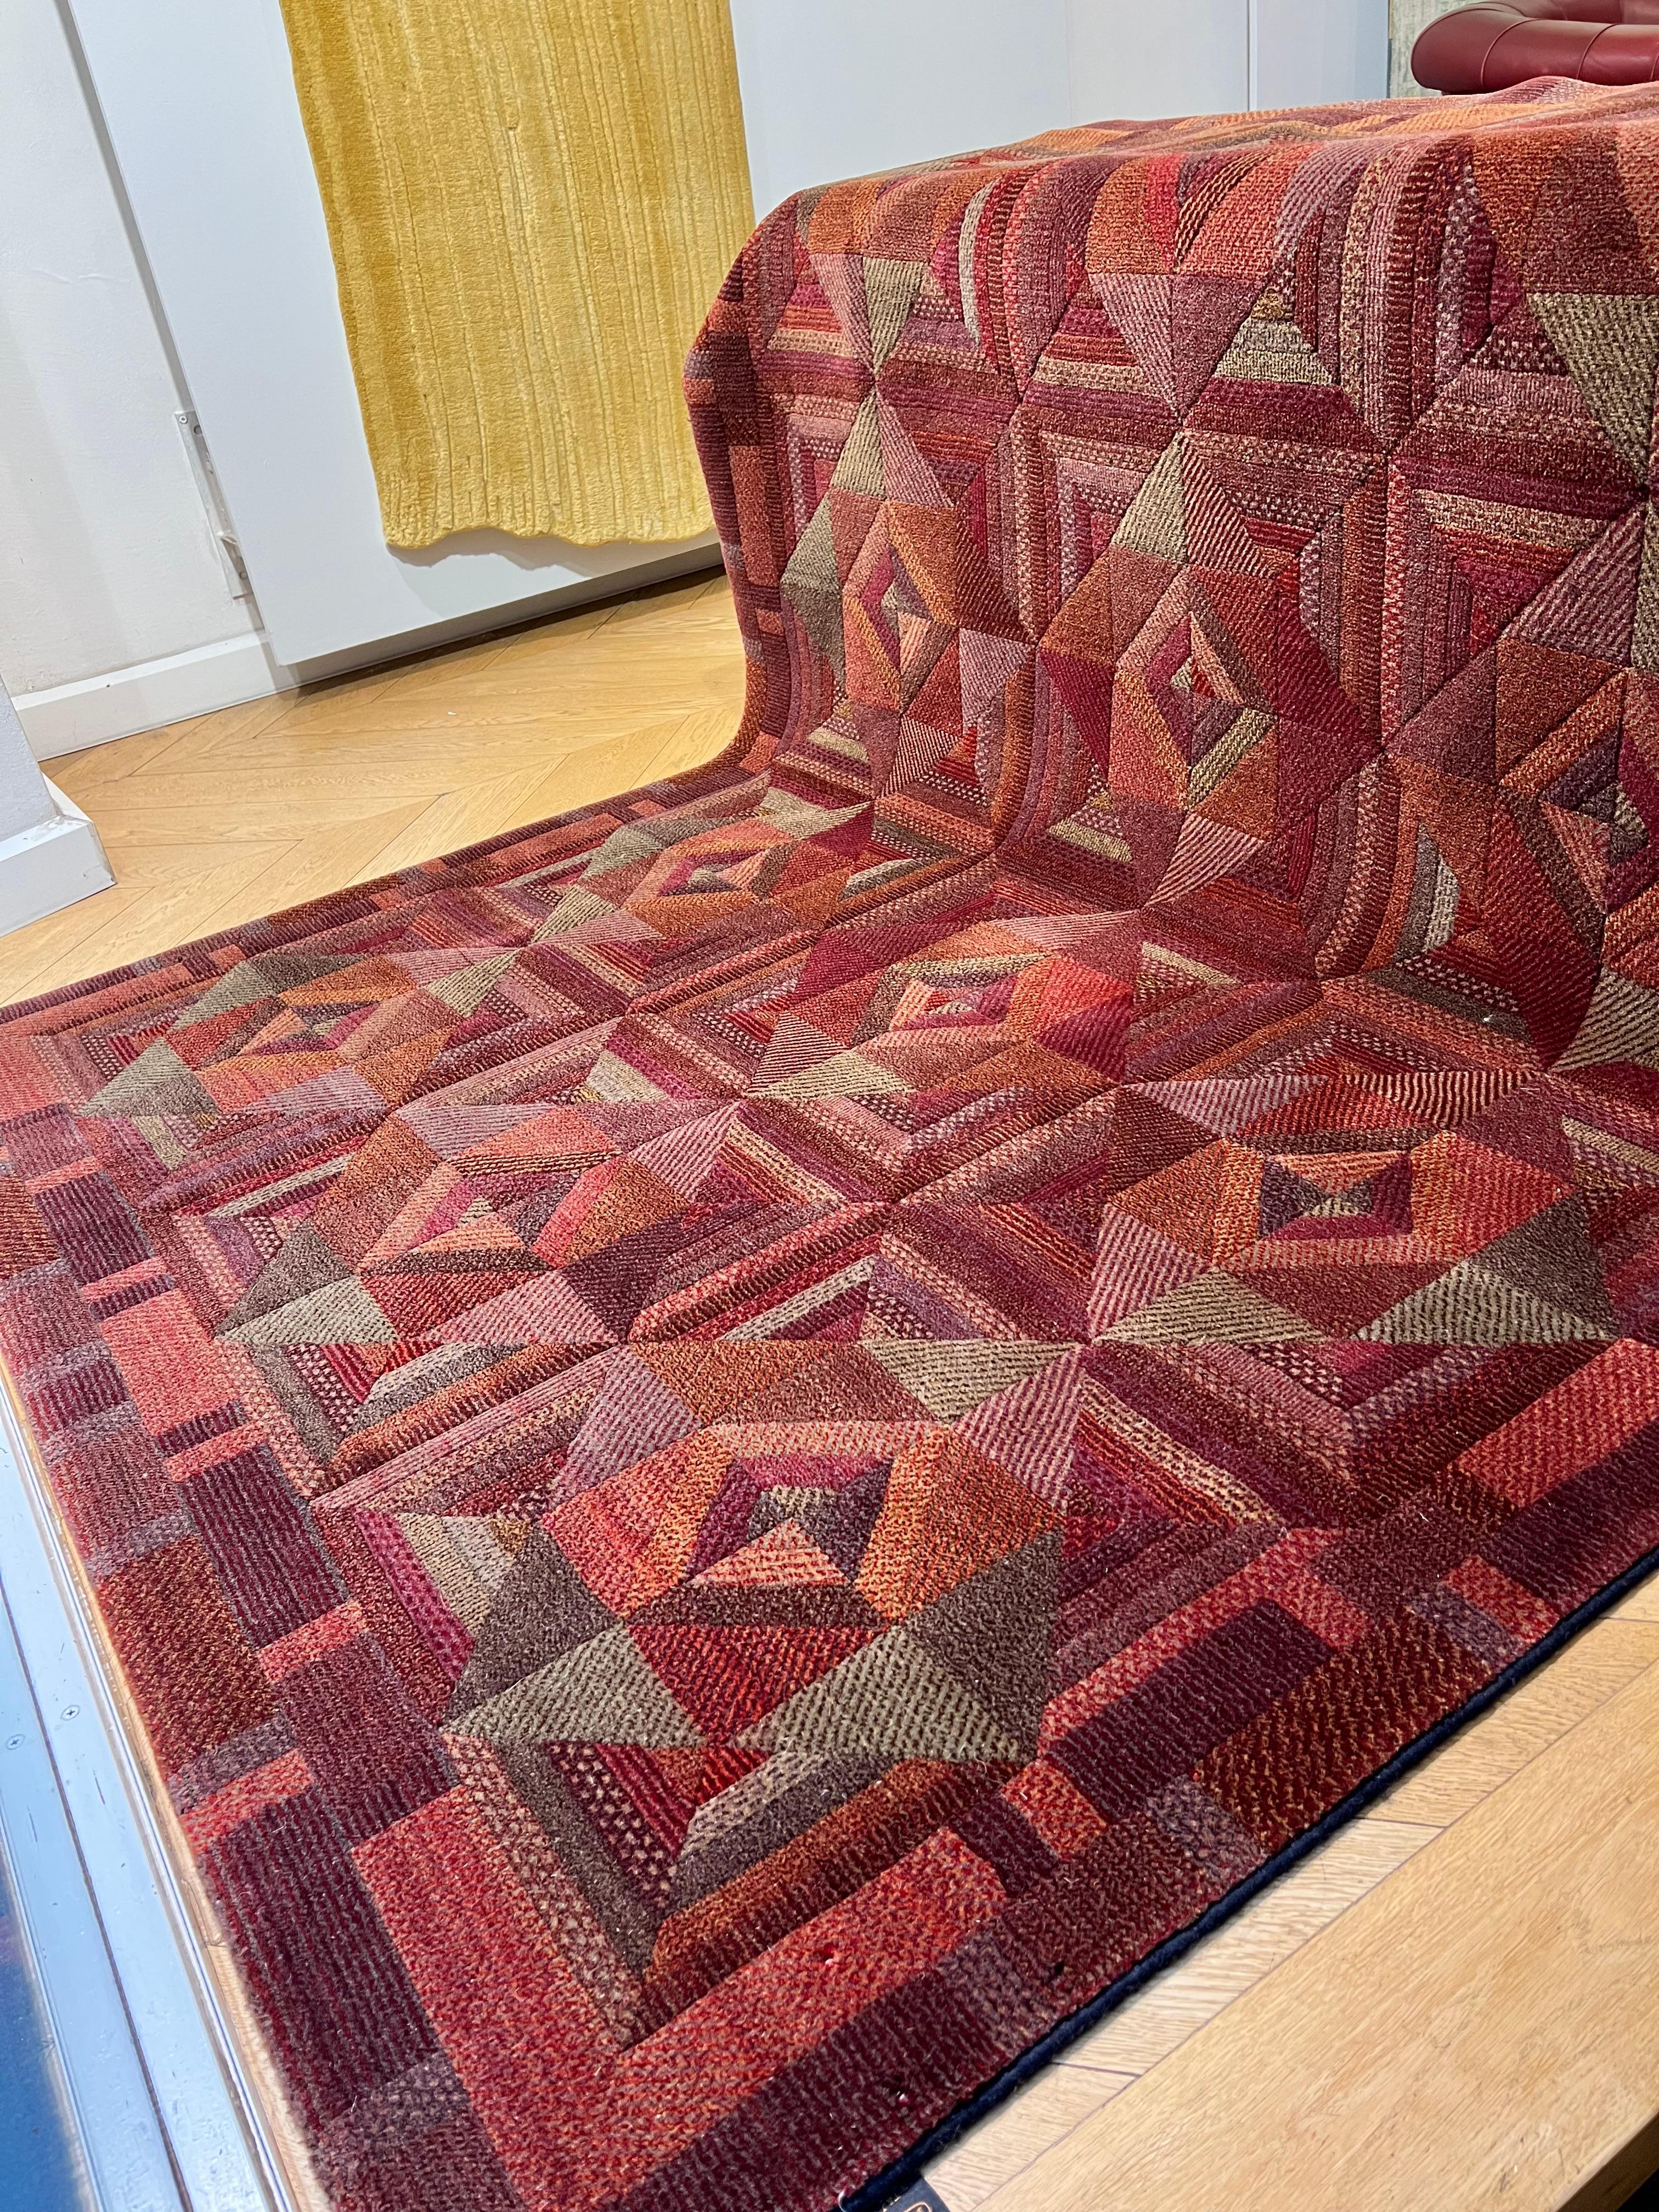 22139 Atelier Missoni carpet cm. 234 x 170 € 1.350

Carpet from the Missoni Casa collection that in the eighties was produced by T&J Vestor which is located in the factories of Golasecca (Varese) on the banks of Ticino, where it was founded in